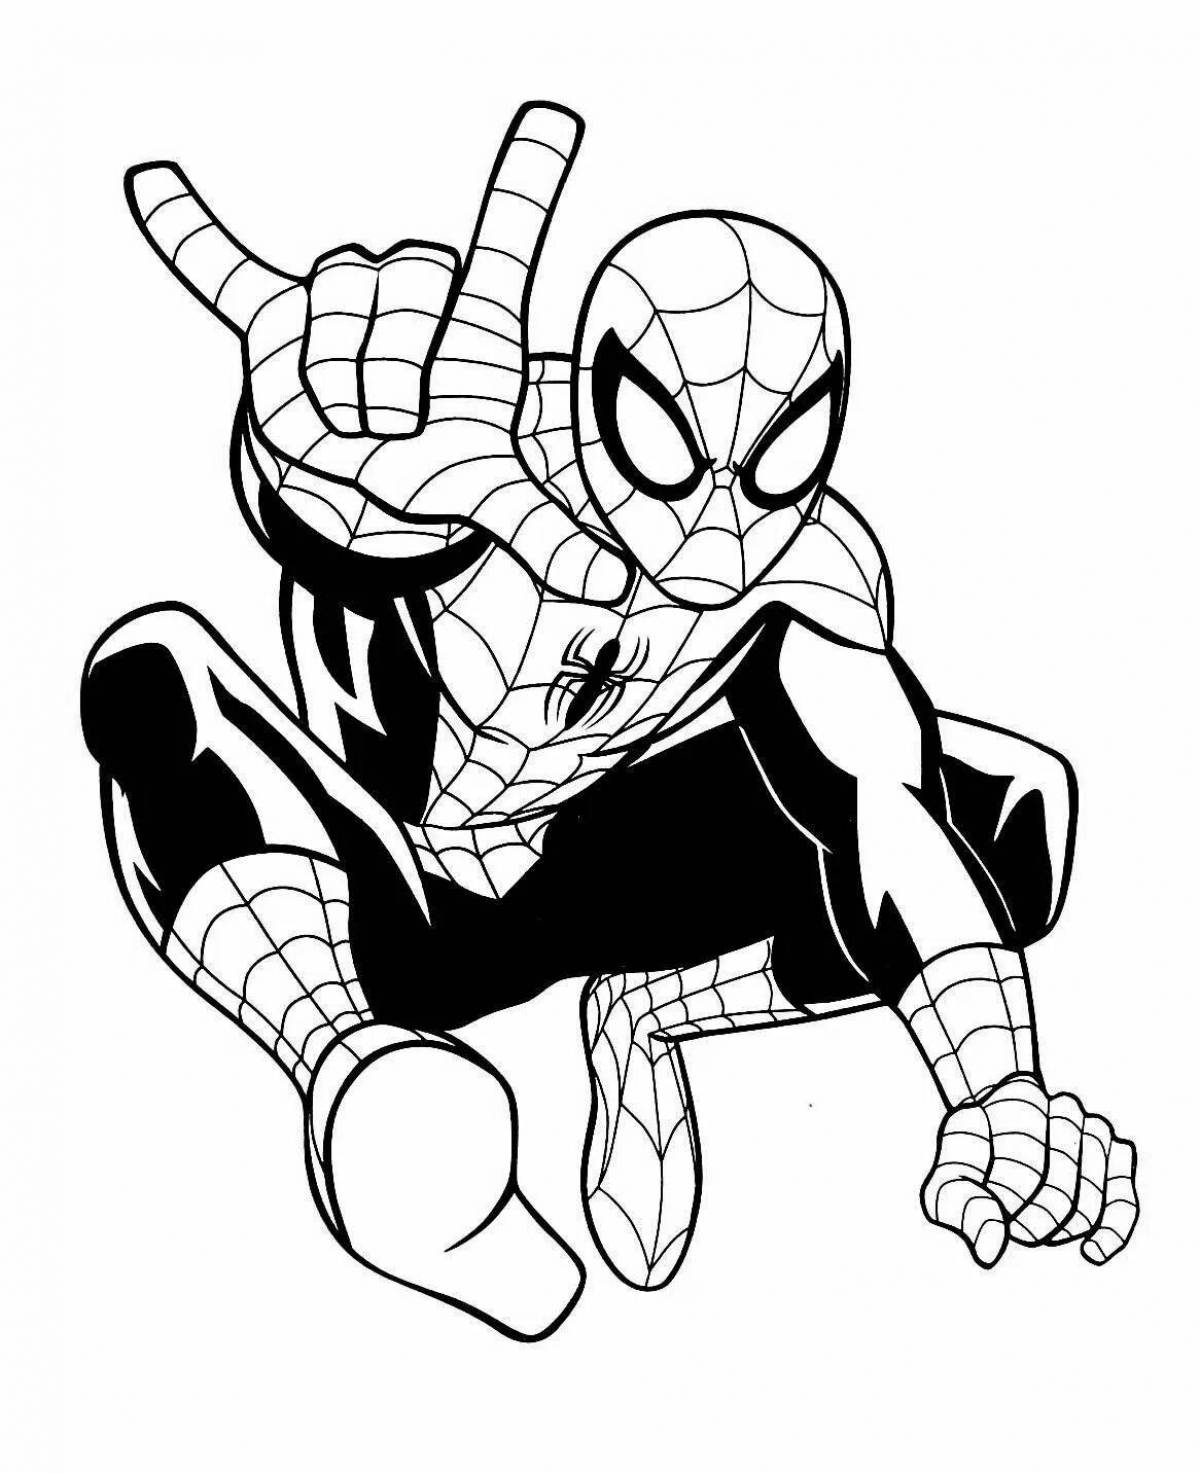 Adorable coloring book for boys marvel superheroes